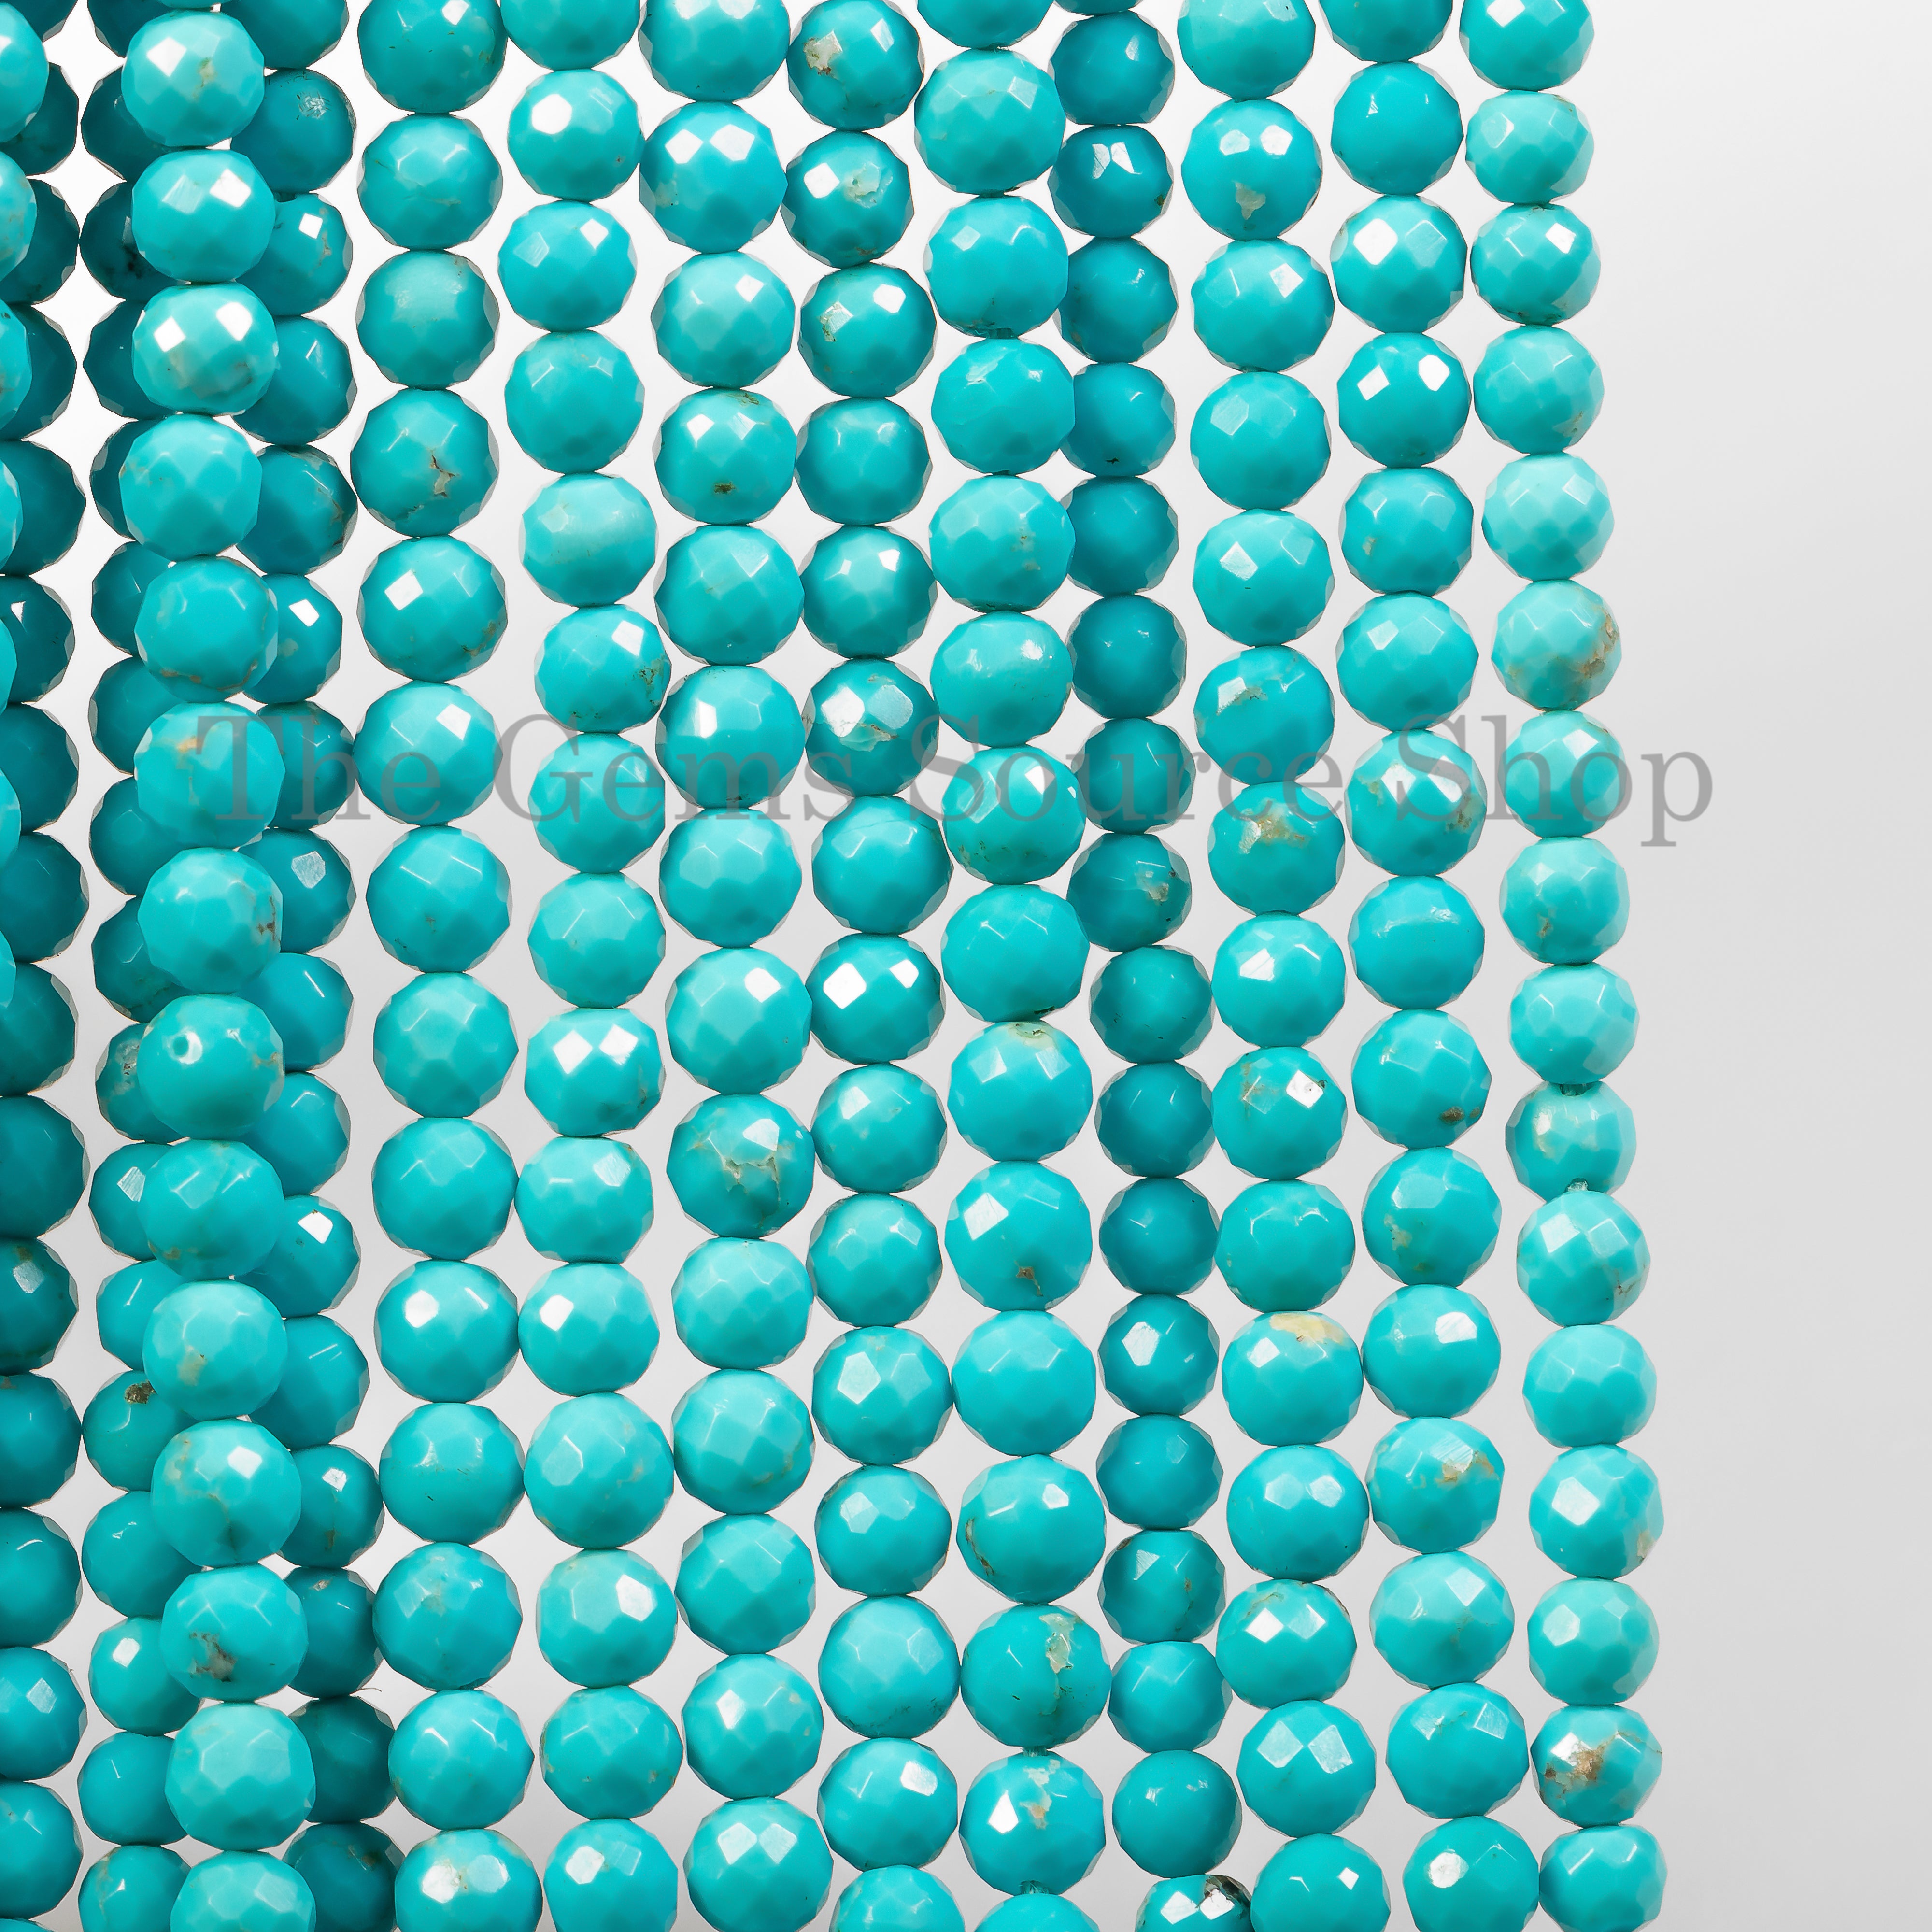 3.5-4.5 mm Turquoise Faceted Round Ball Beads for jewelry making TGS-4637